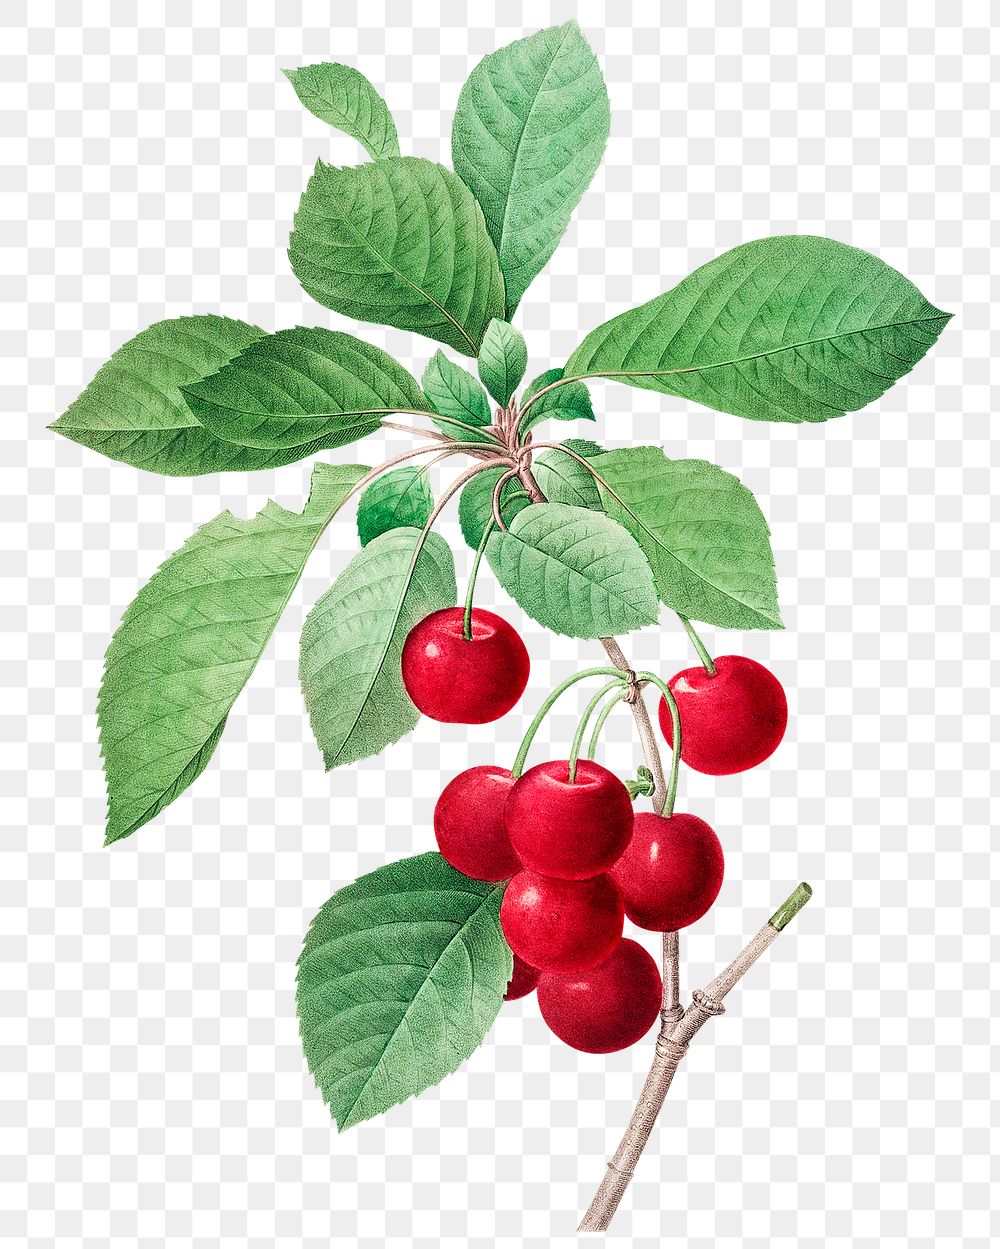 Red cherry plant png botanical illustration, remixed from artworks by Pierre-Joseph Redout&eacute;